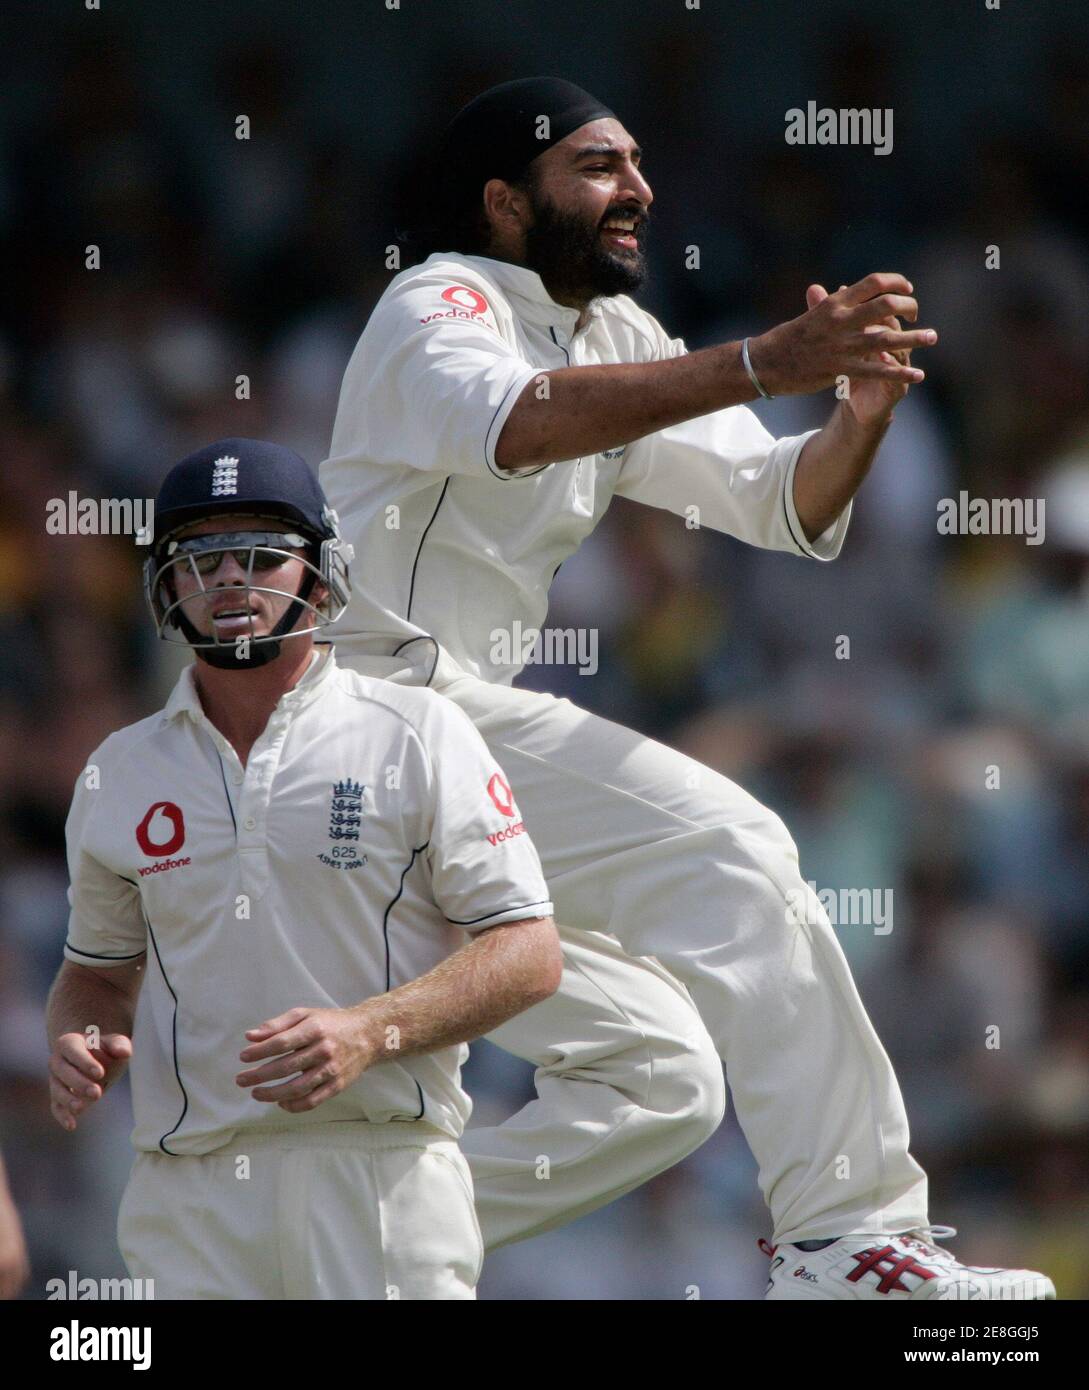 England's Monty Panesar (R) leaps into the air as team mate Ian Bell moves in after Panesar dismissed Australia's Michael Hussey during day three of the third Ashes cricket test in Perth December 16, 2006. MOBILES OUT, EDITORIAL USE ONLY REUTERS/Will Burgess  (AUSTRALIA) Stock Photo